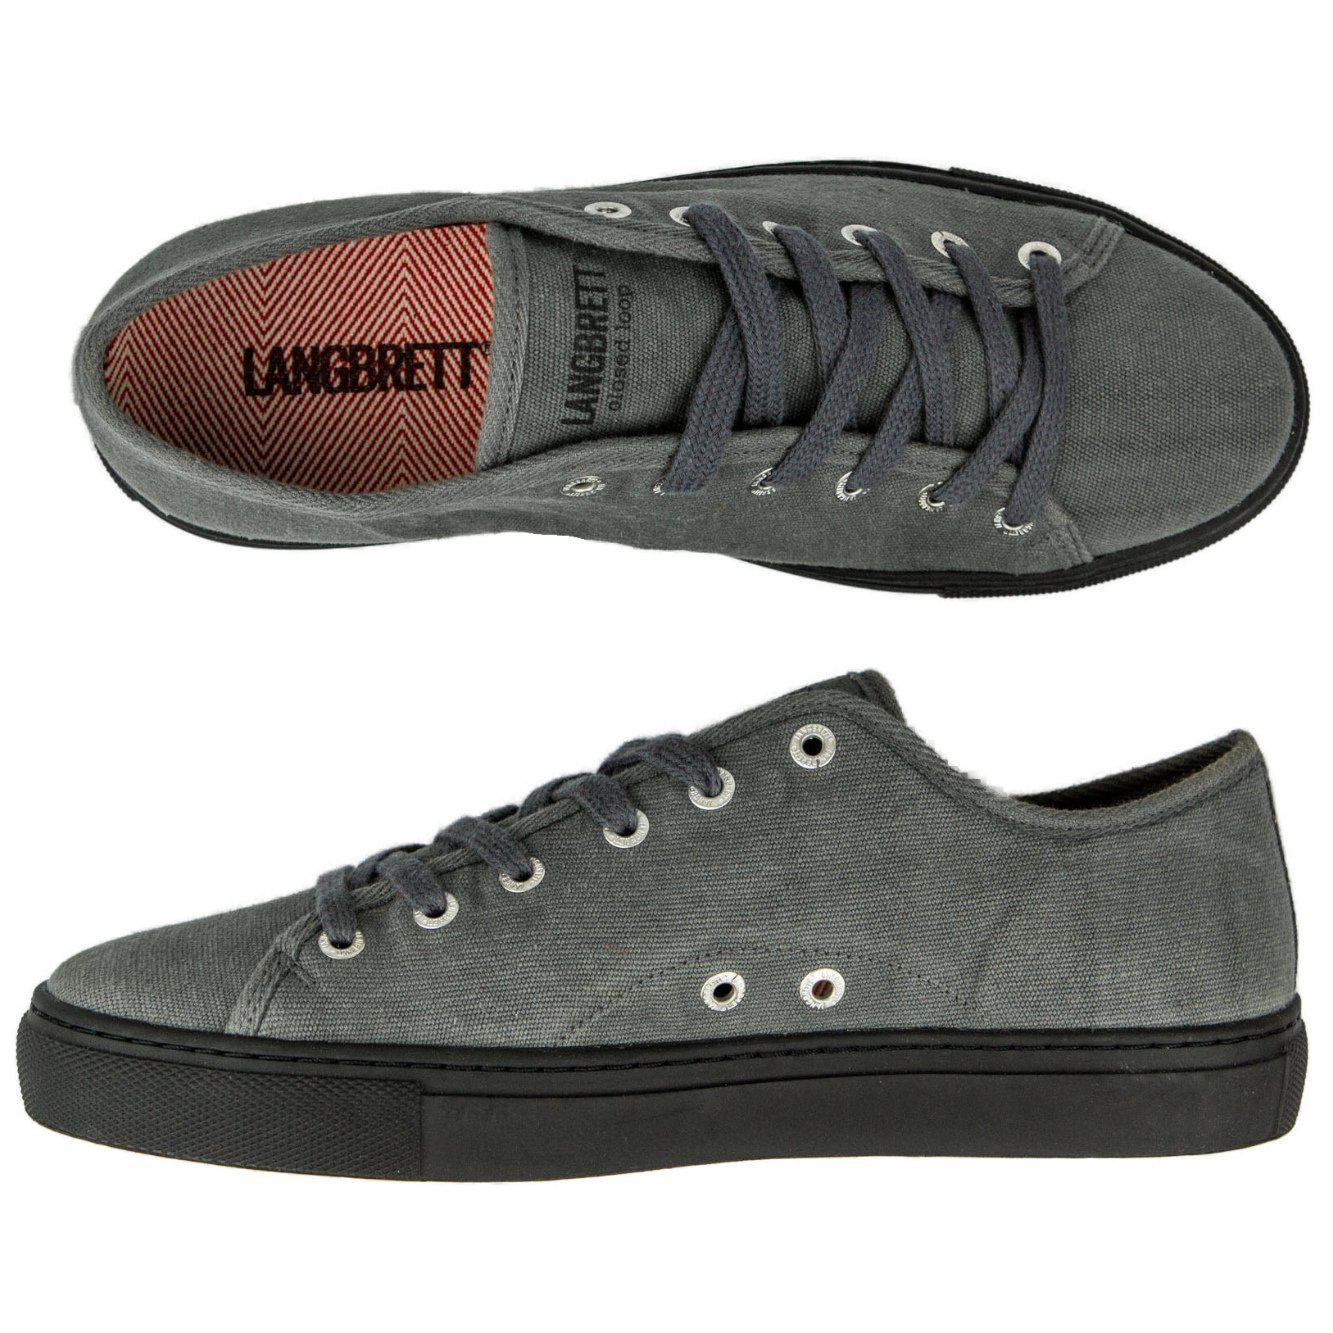 Langbrett - SUM - Unisex Ecological Shoes - Made From Recycled Cotton - Weekendbee - sustainable sportswear